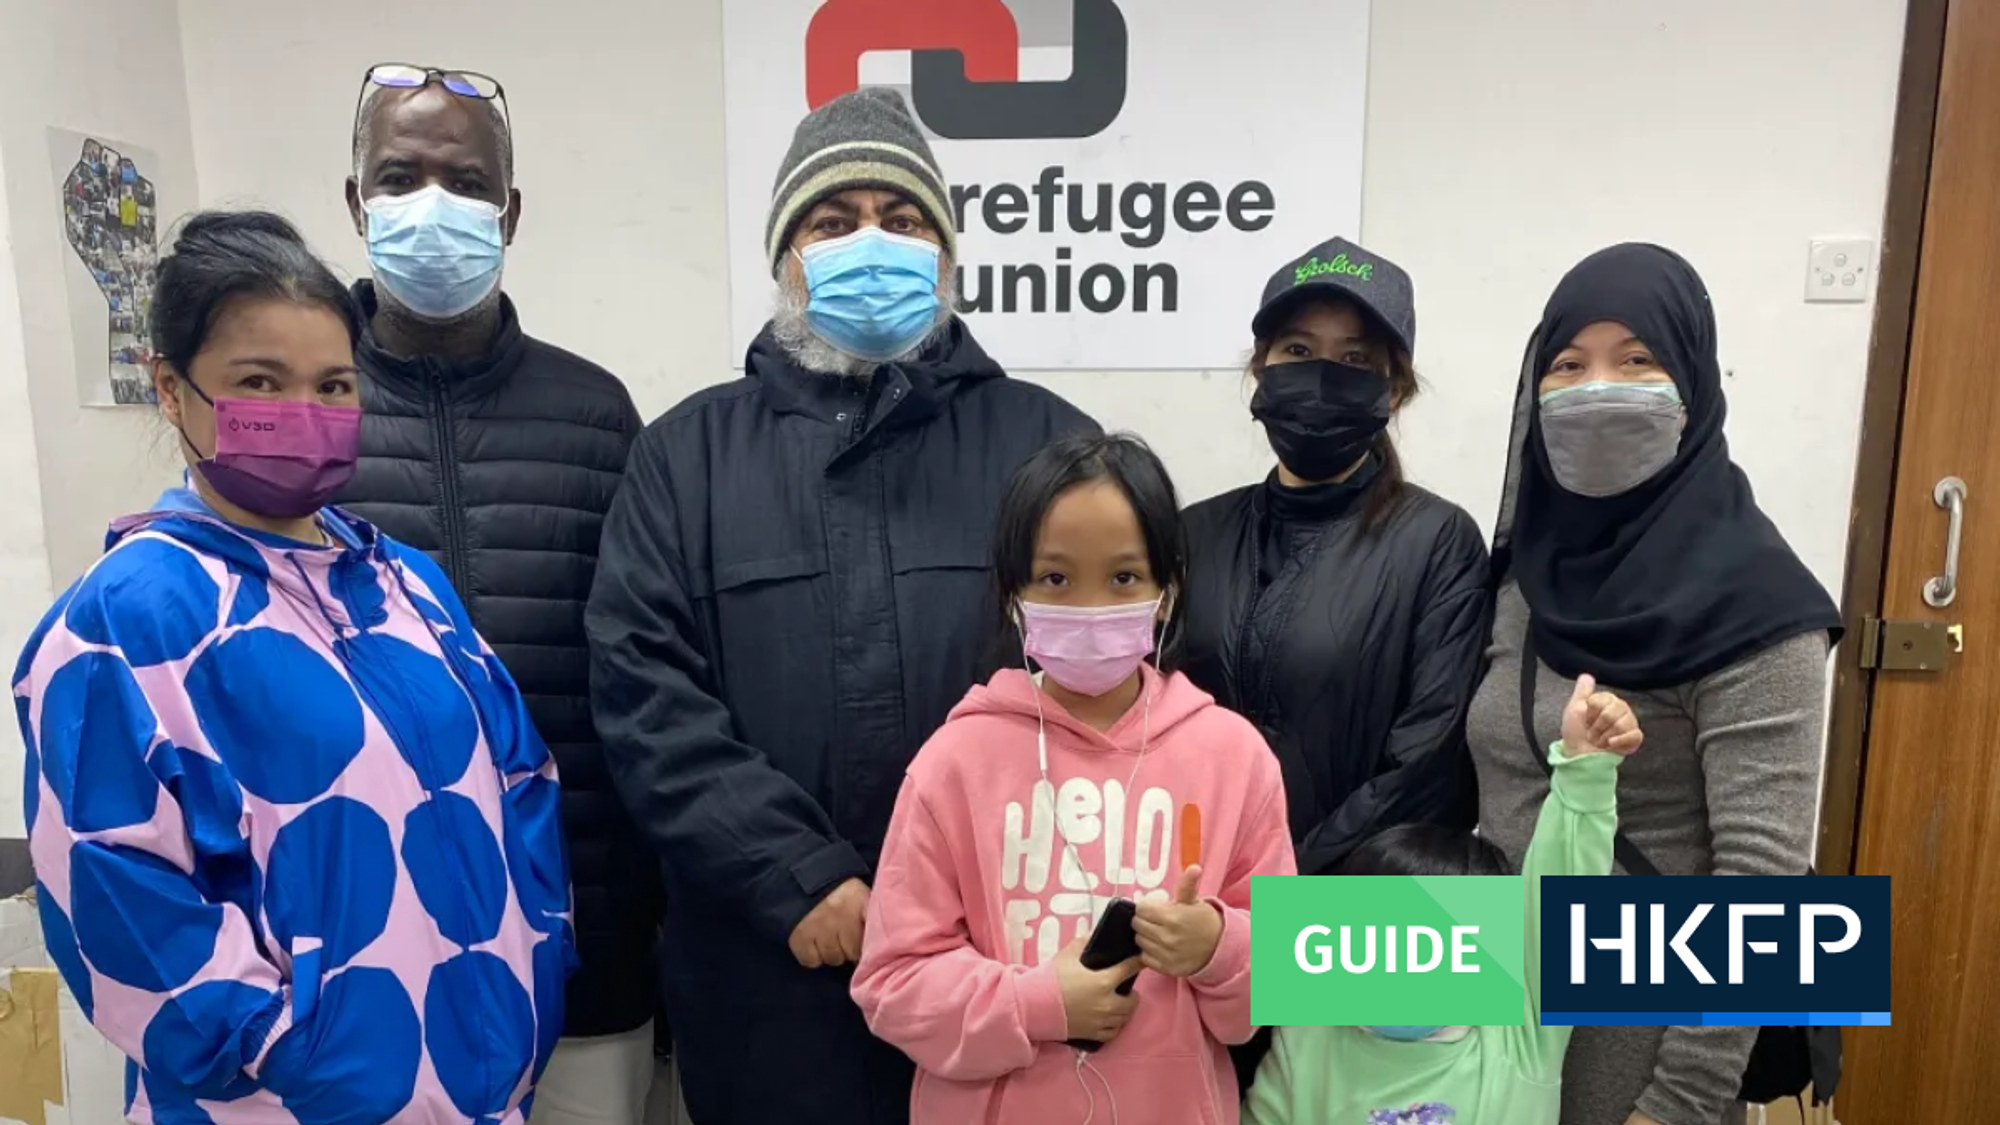 HKFP Guide: How to support Hong Kong's refugees, domestic workers & most vulnerable during Covid-19